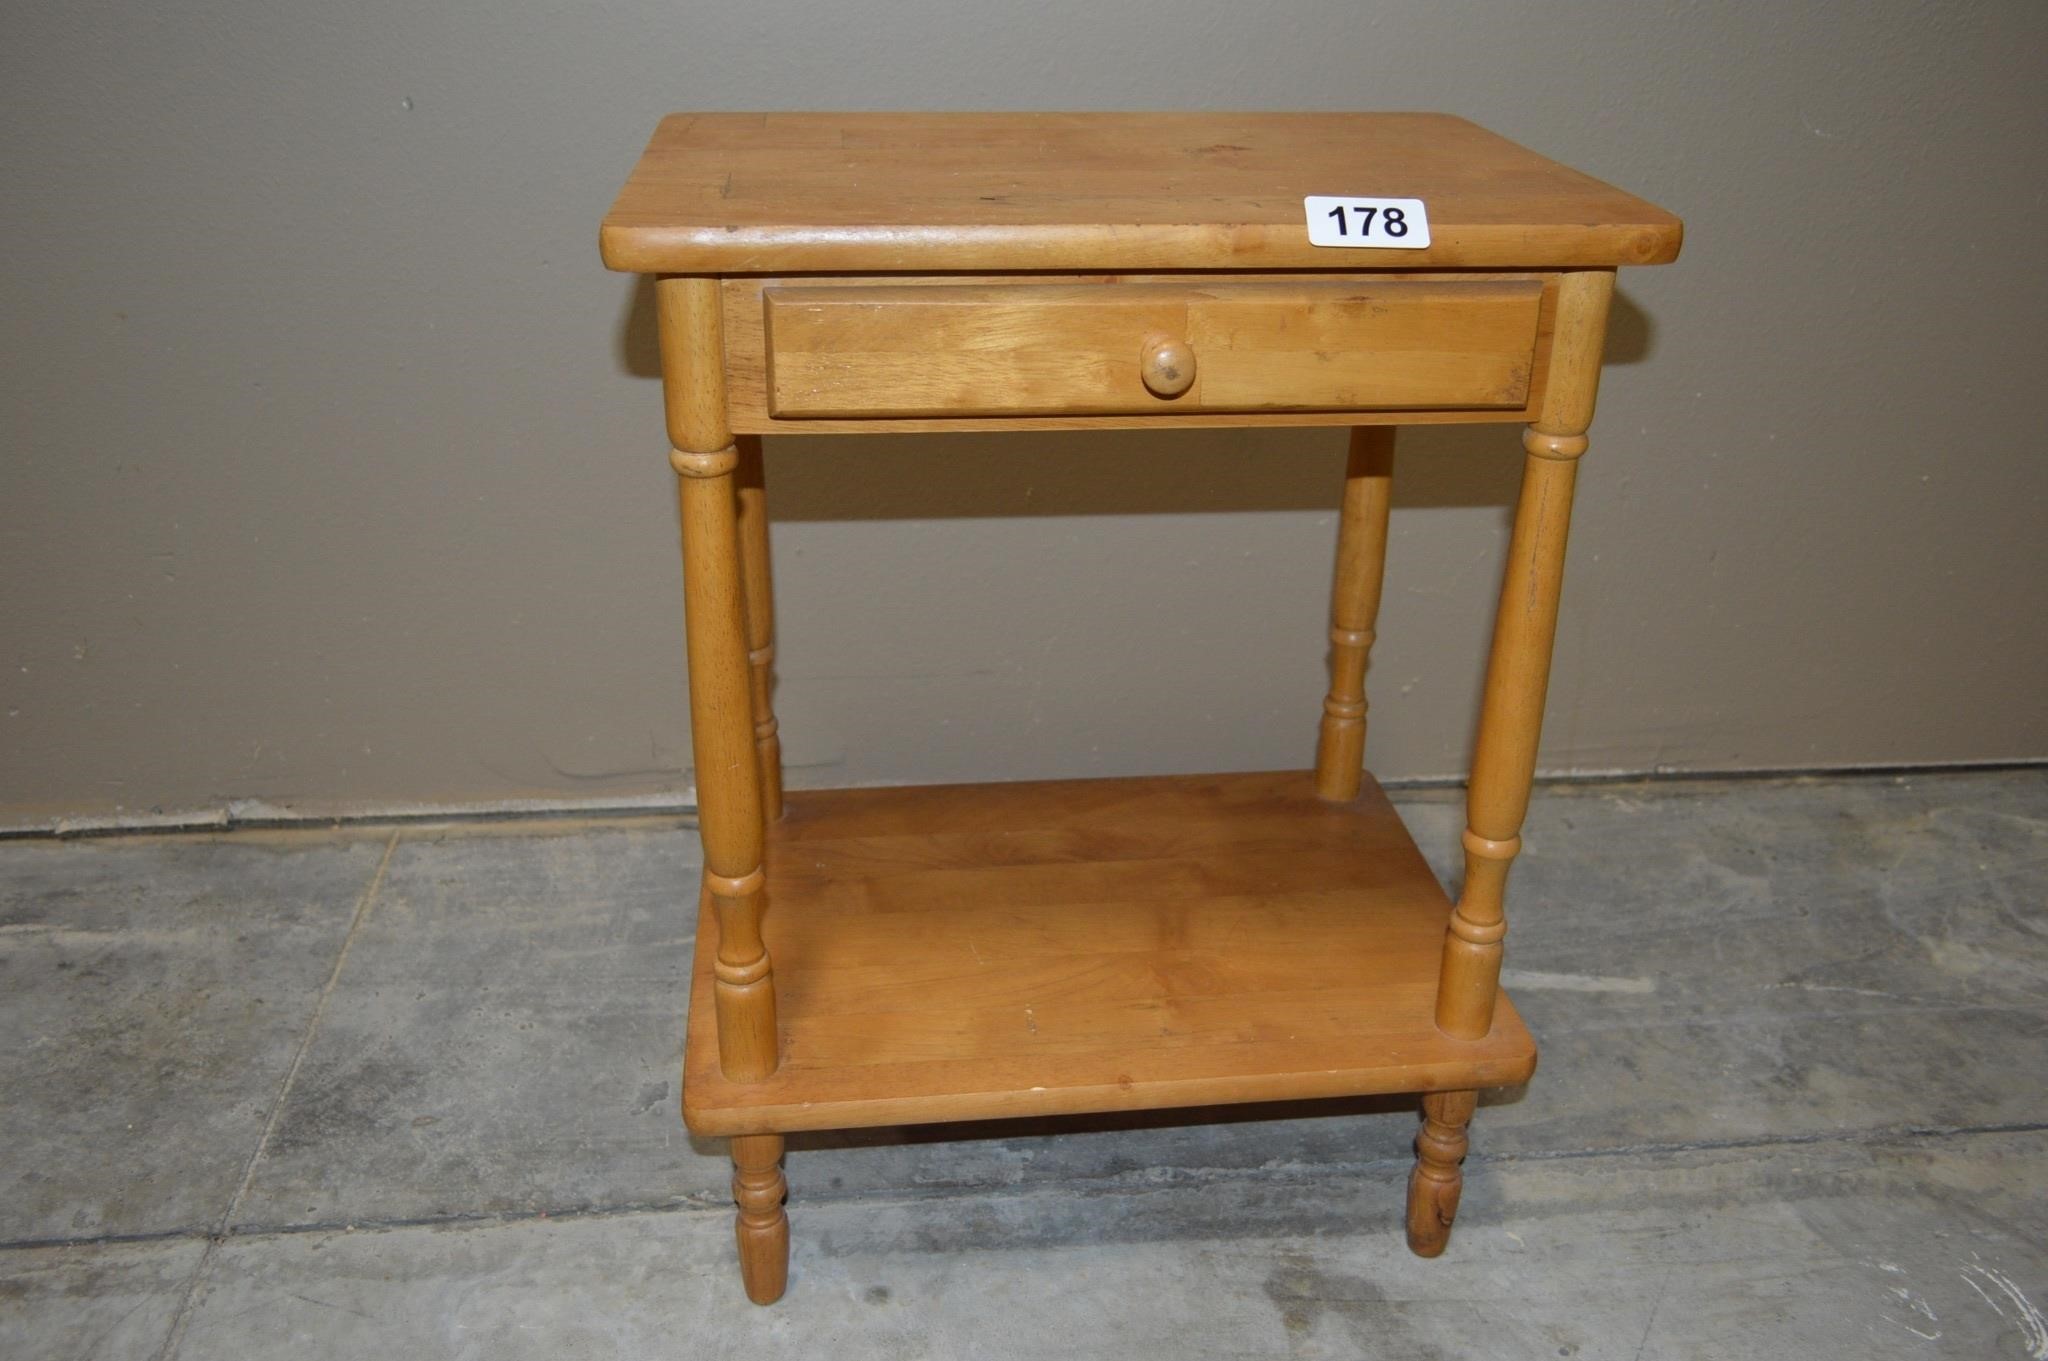 Small table with single drawer and shelf